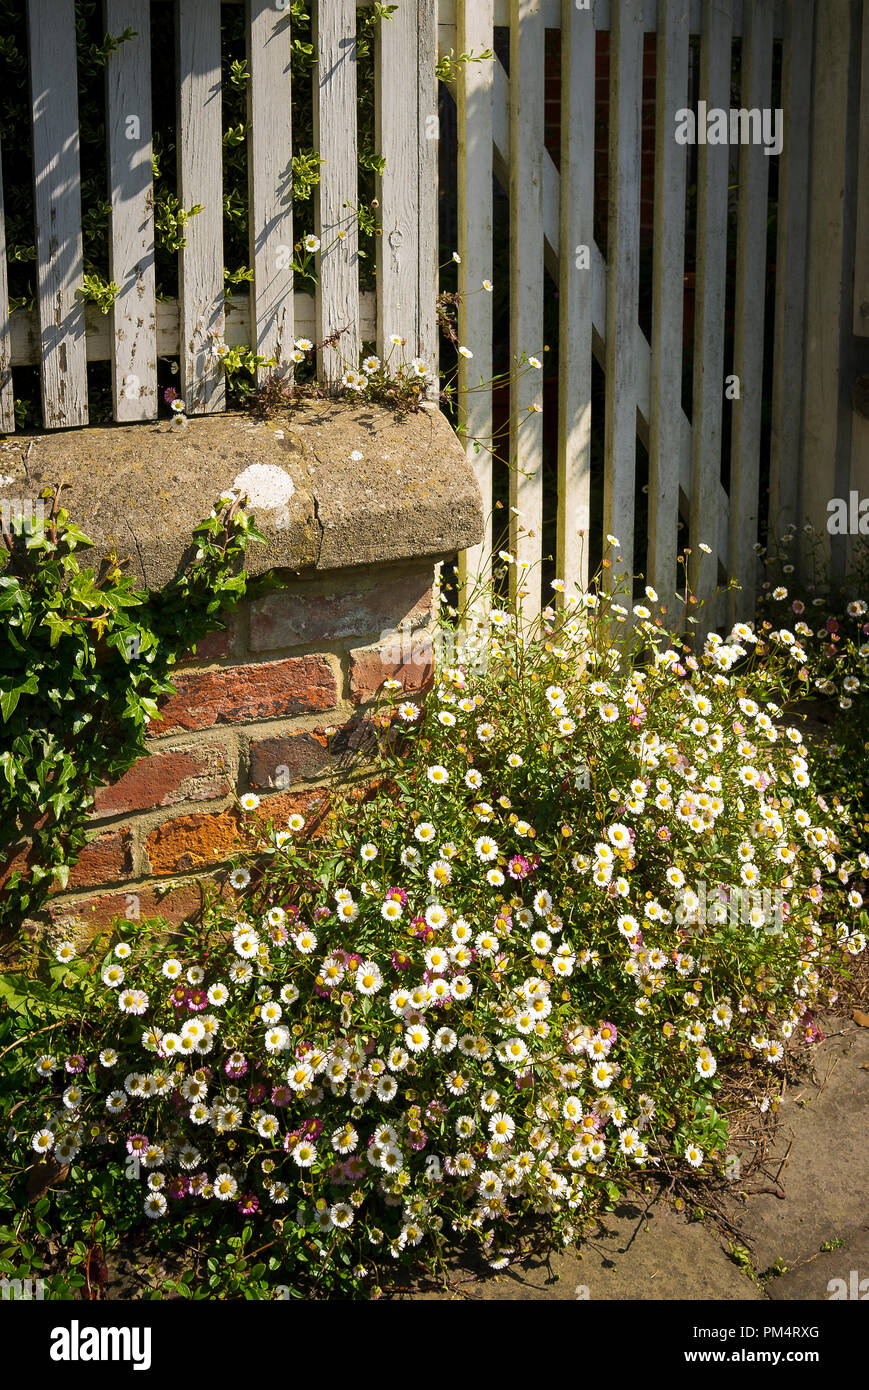 Self-seeded Erigeron outside a town cottage in Devizes Wiltshire England UKh Stock Photo